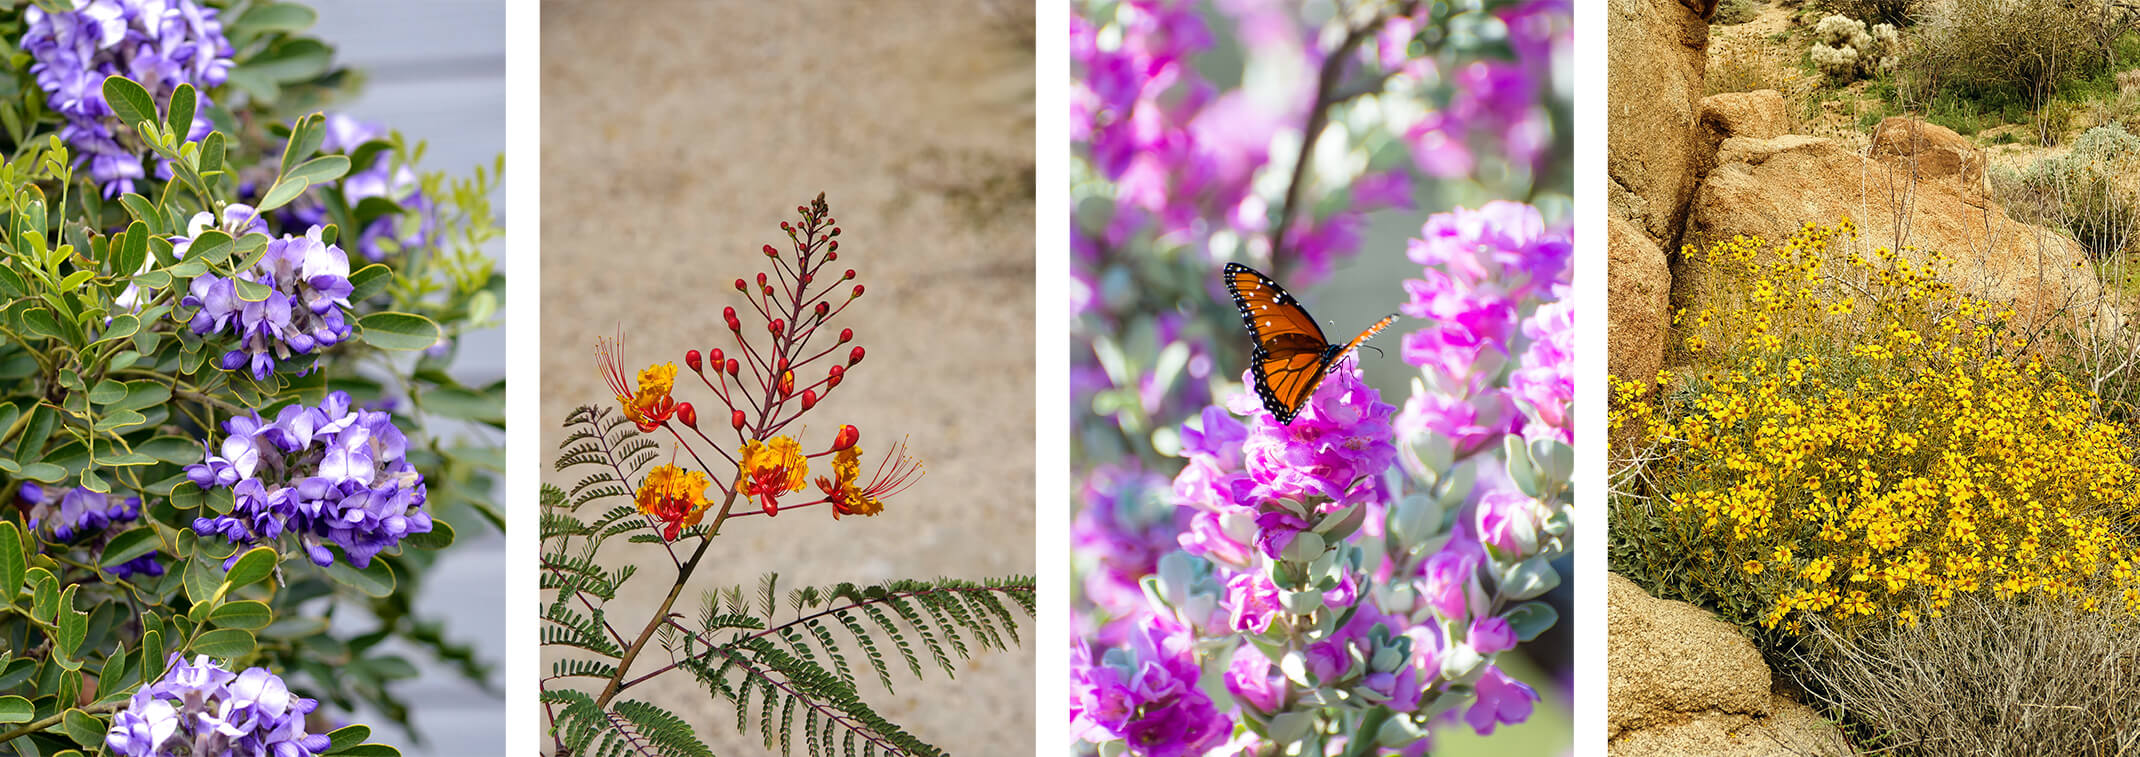 A Texas Mountain Laurel, a Red BIrd of Paradise, Texas Sage with a Butterfly, and Brittlebush growing in the desert near rocks.